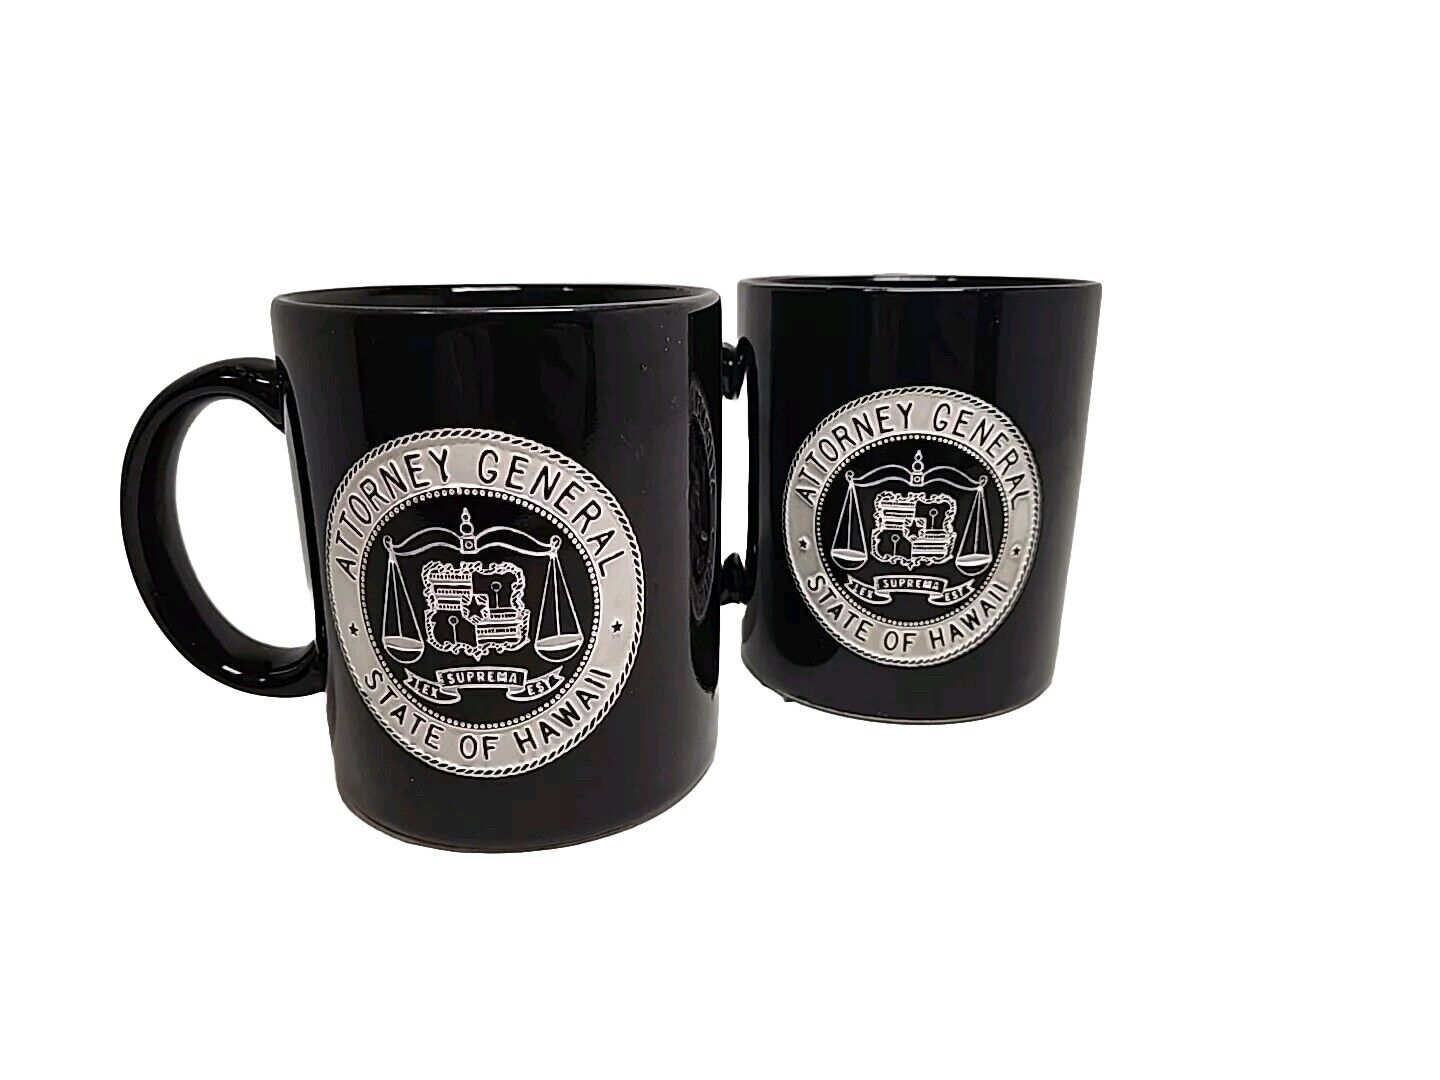 Vintage Attorney General State Of Hawaii Mugs | Engraved Seal | Set of Two